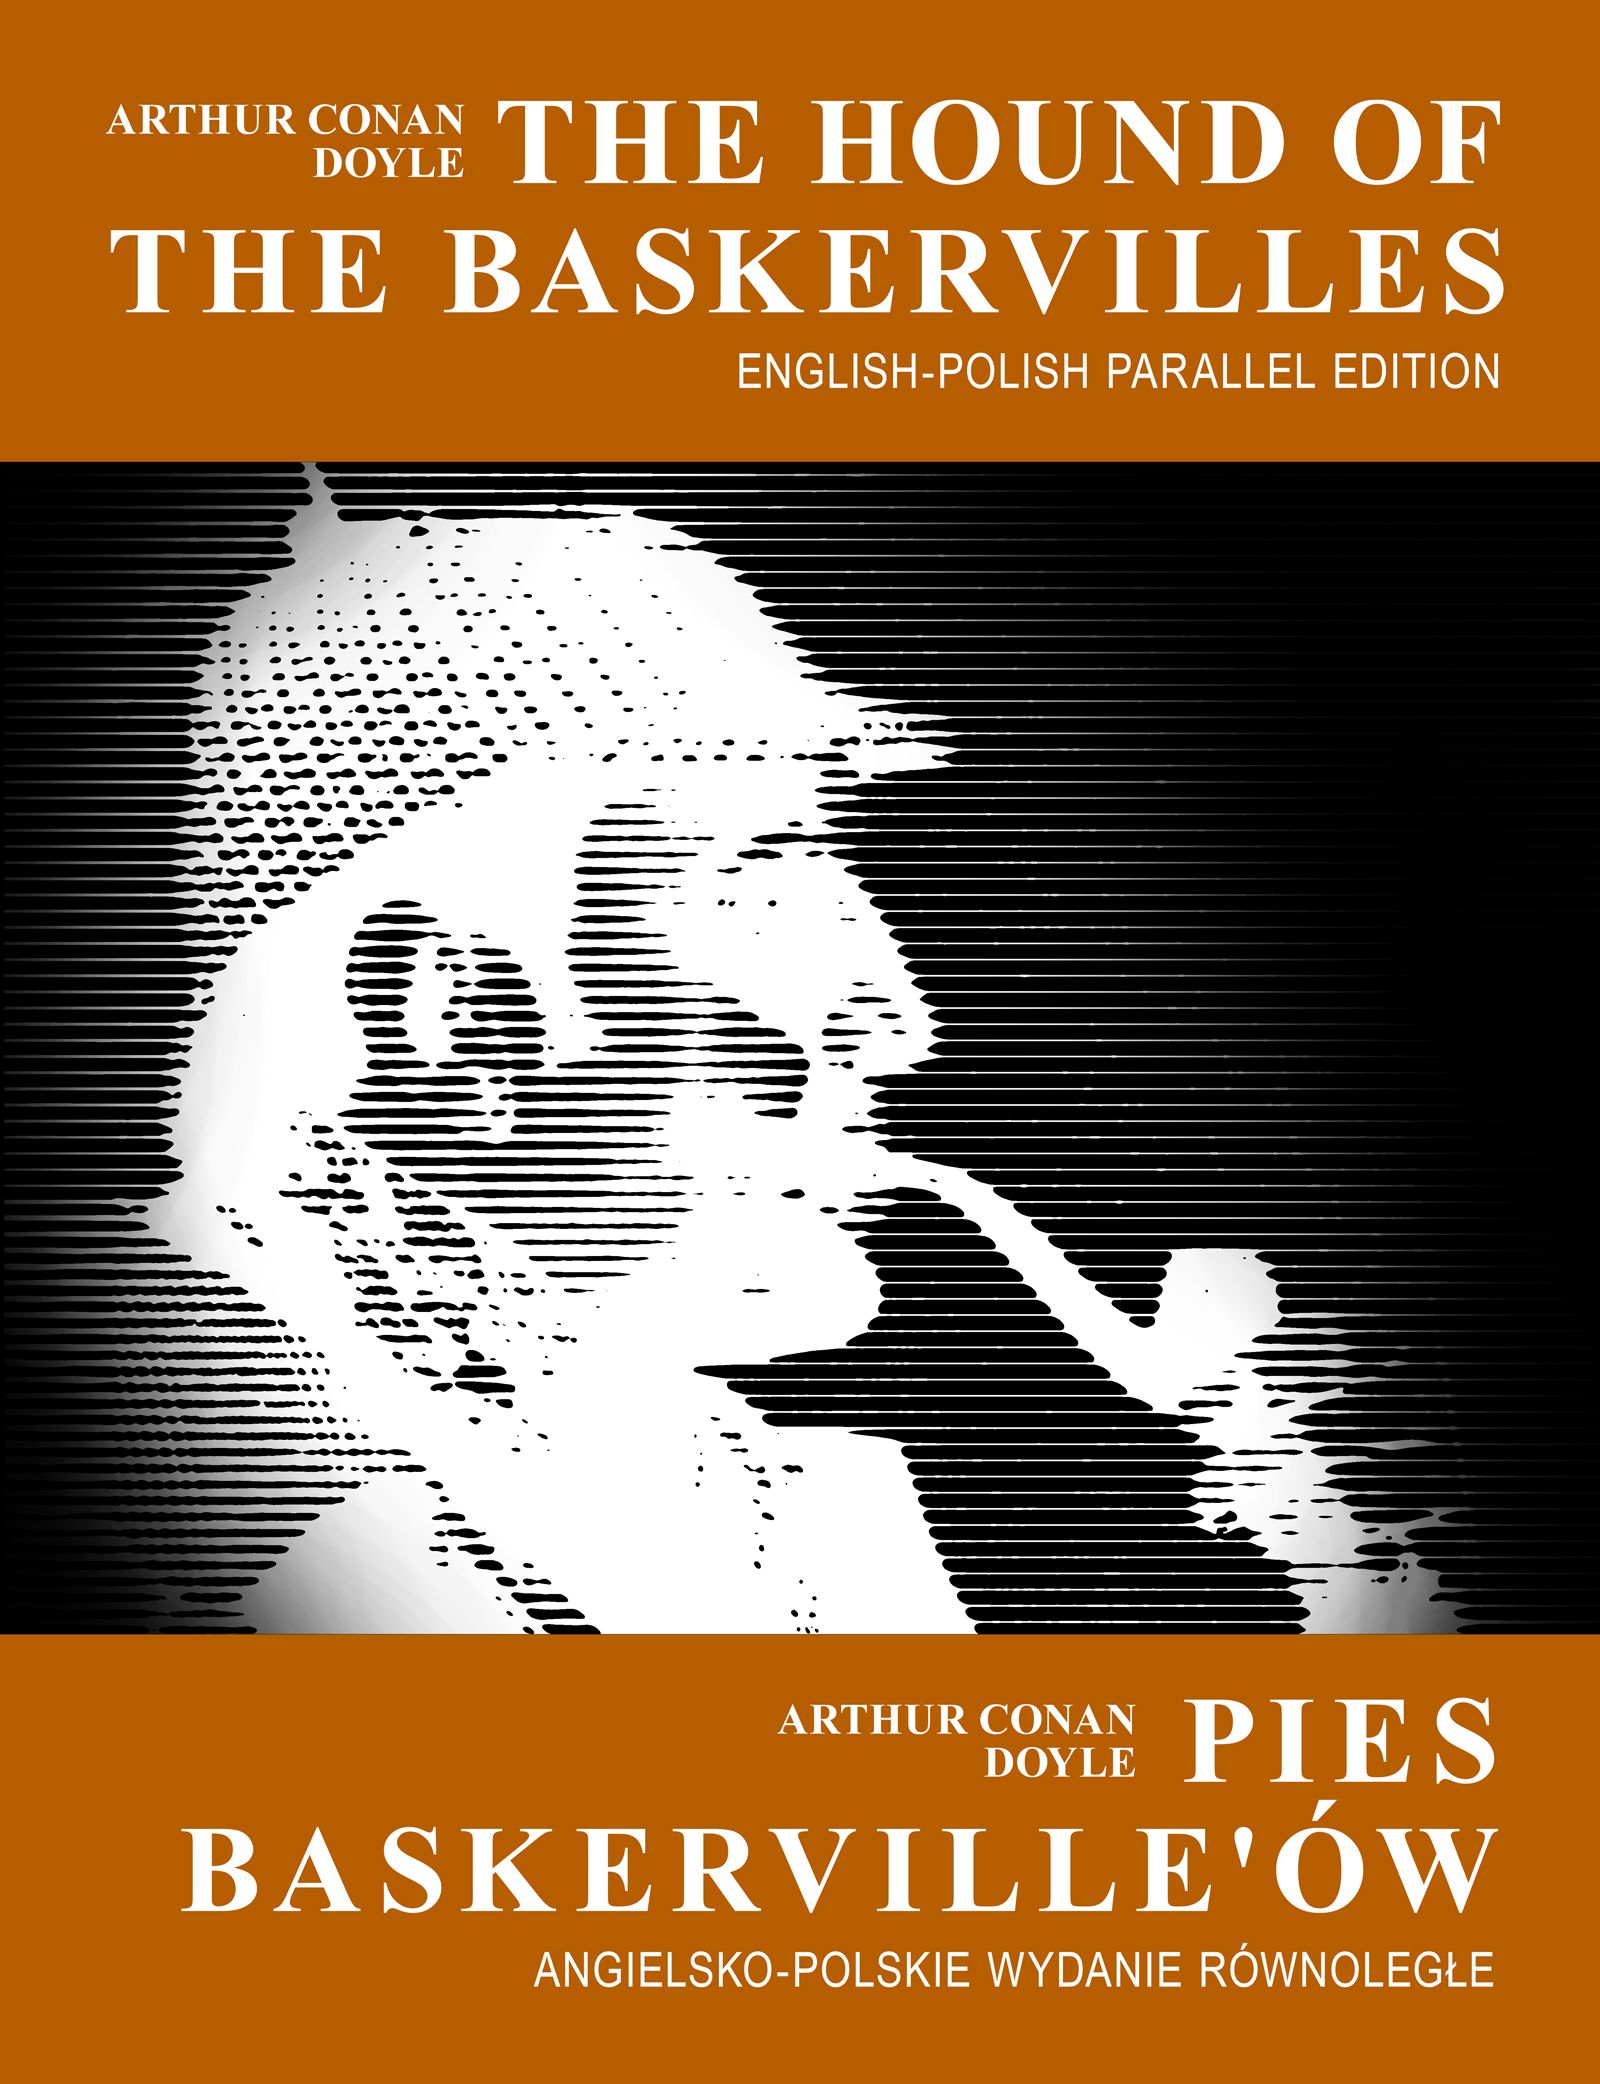 The Hound of the Baskervilles (English-Polish Parallel Edition with Illustrations)'s Book Image